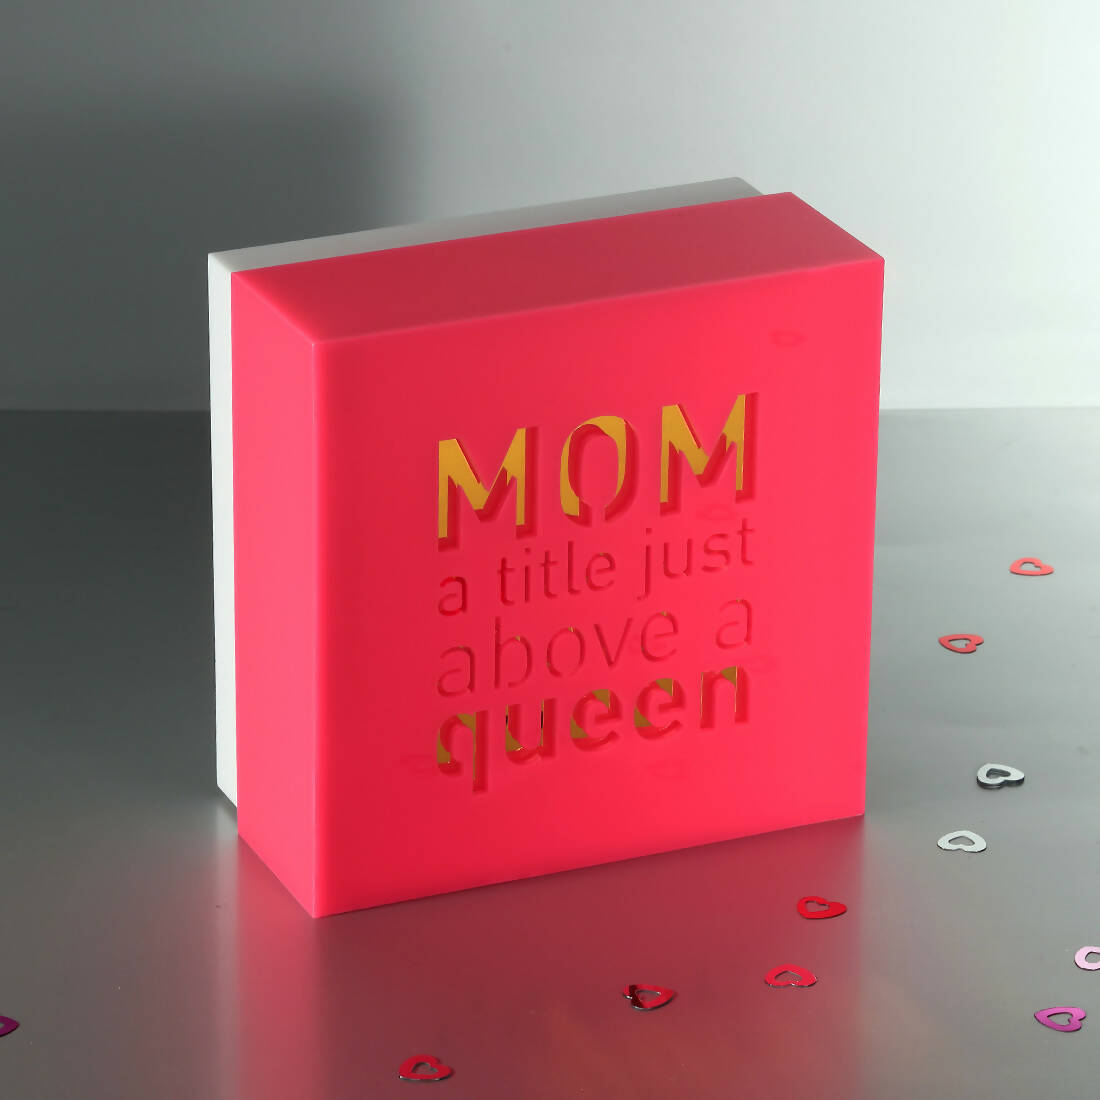 Custom-made mother's box design. CHOCOLATE NOT INCLUDED.